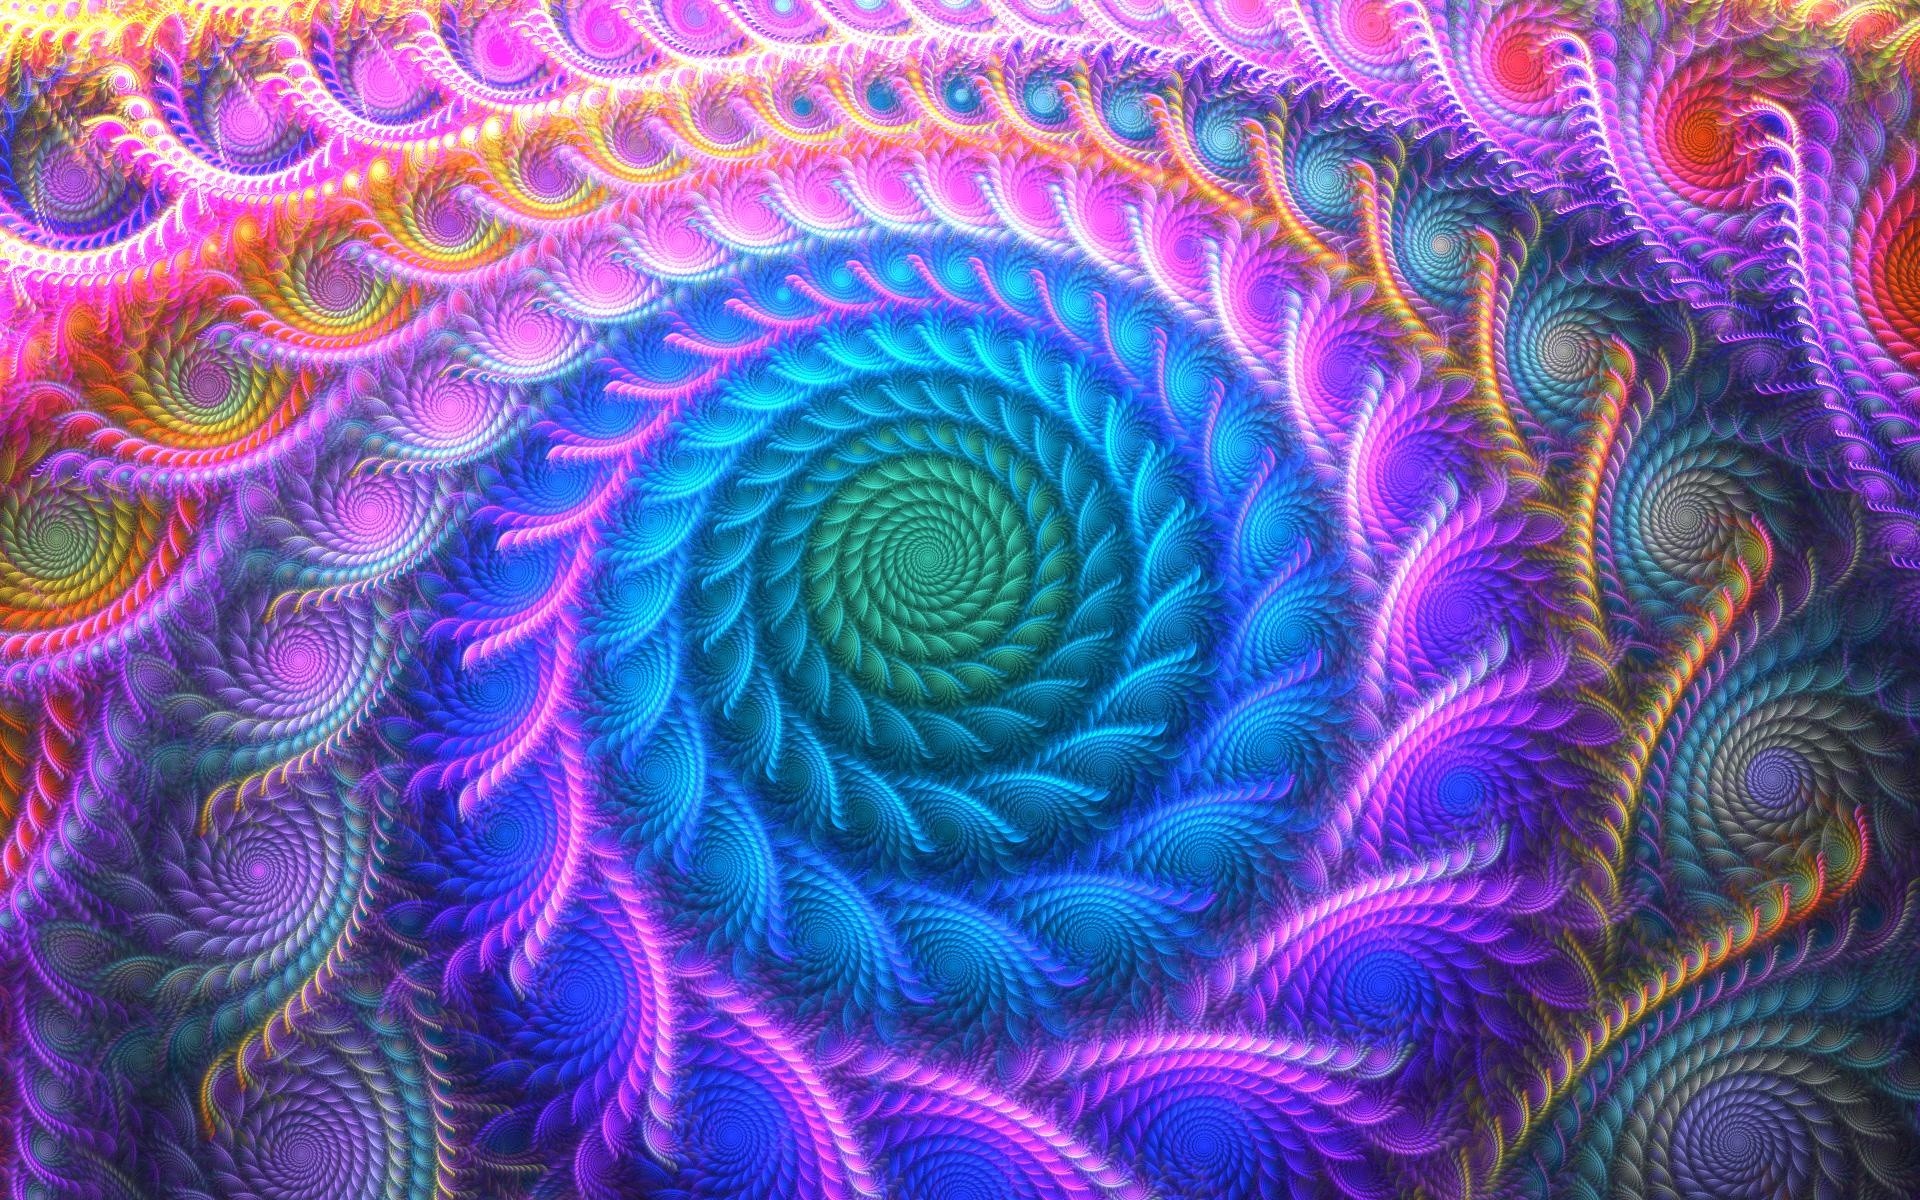 1920x1200 0  Wallpaper Of Acid Trip Hd Desktop Trippy Iphone Pics Computer   Weekly Wallpaper Go Fractal And Straddle The Line Between Maths